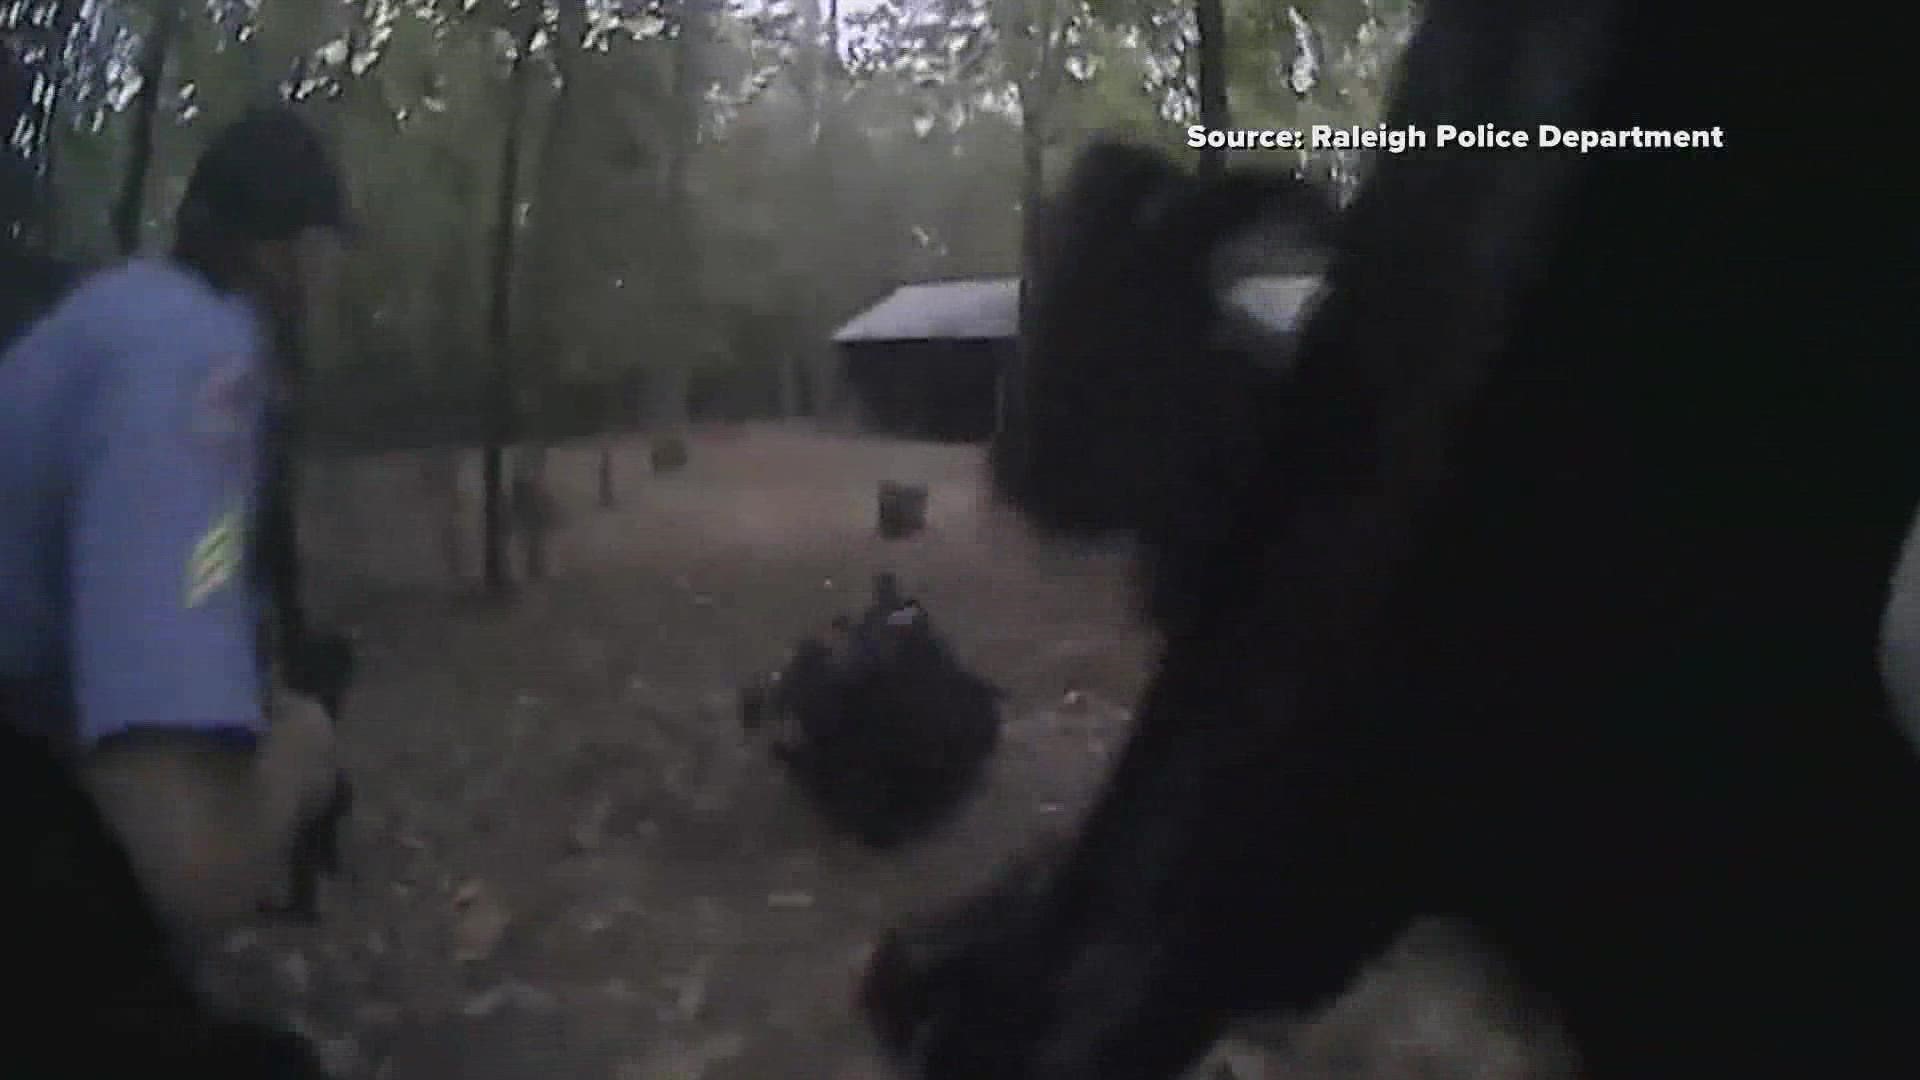 New video from the Raleigh police department shows how officers engaged in a shootout with the suspect on October 13.